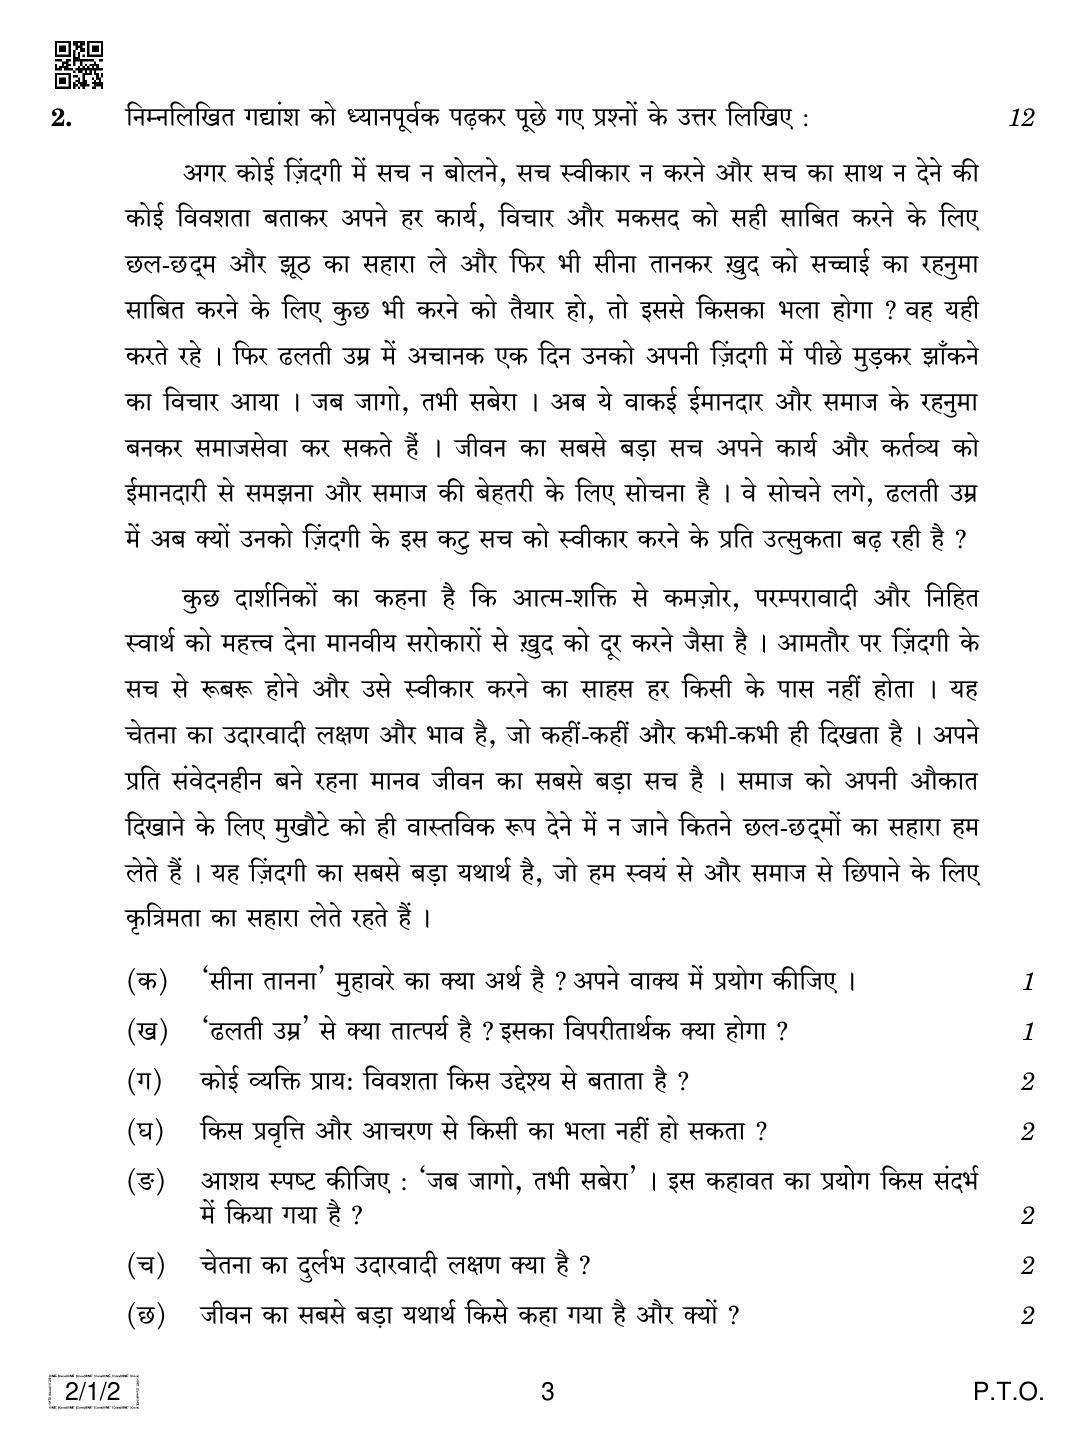 CBSE Class 12 2-1-2 HINDI CORE 2019 Compartment Question Paper - Page 3